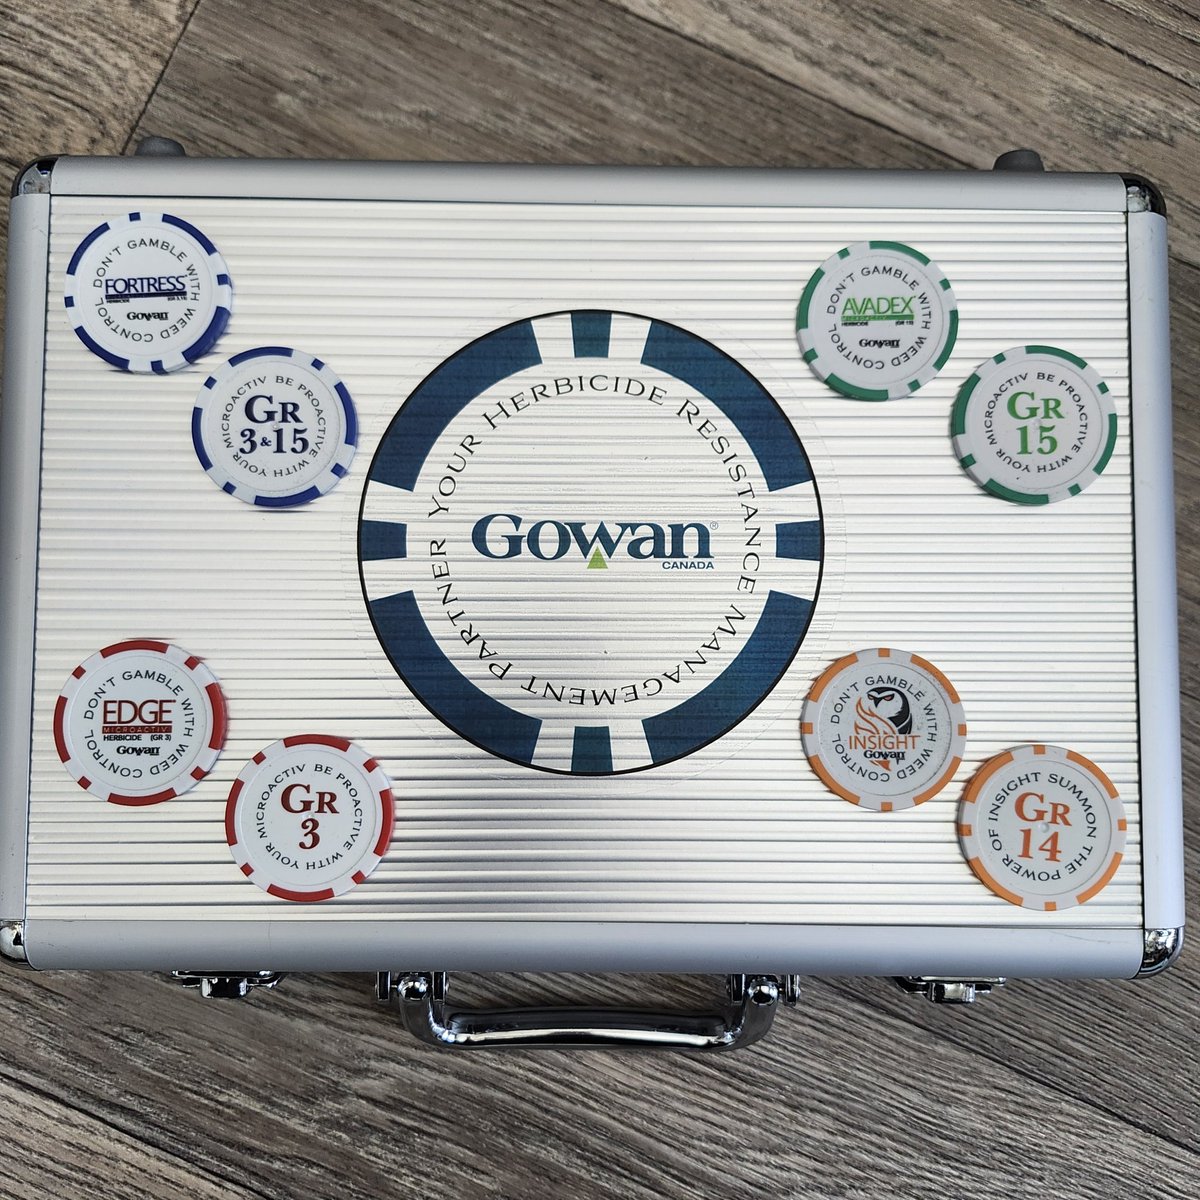 Have you booked your wheat Pre-Seed Burn Down? John Collins with JDC Ag booked his Insight SC early at @SynergyAGYktn and won one of these unique @gowancanada Poker Chip Sets, featuring Edge, Avadex, Fortress and of course Insight! Congratulations, John, & thank you so much!